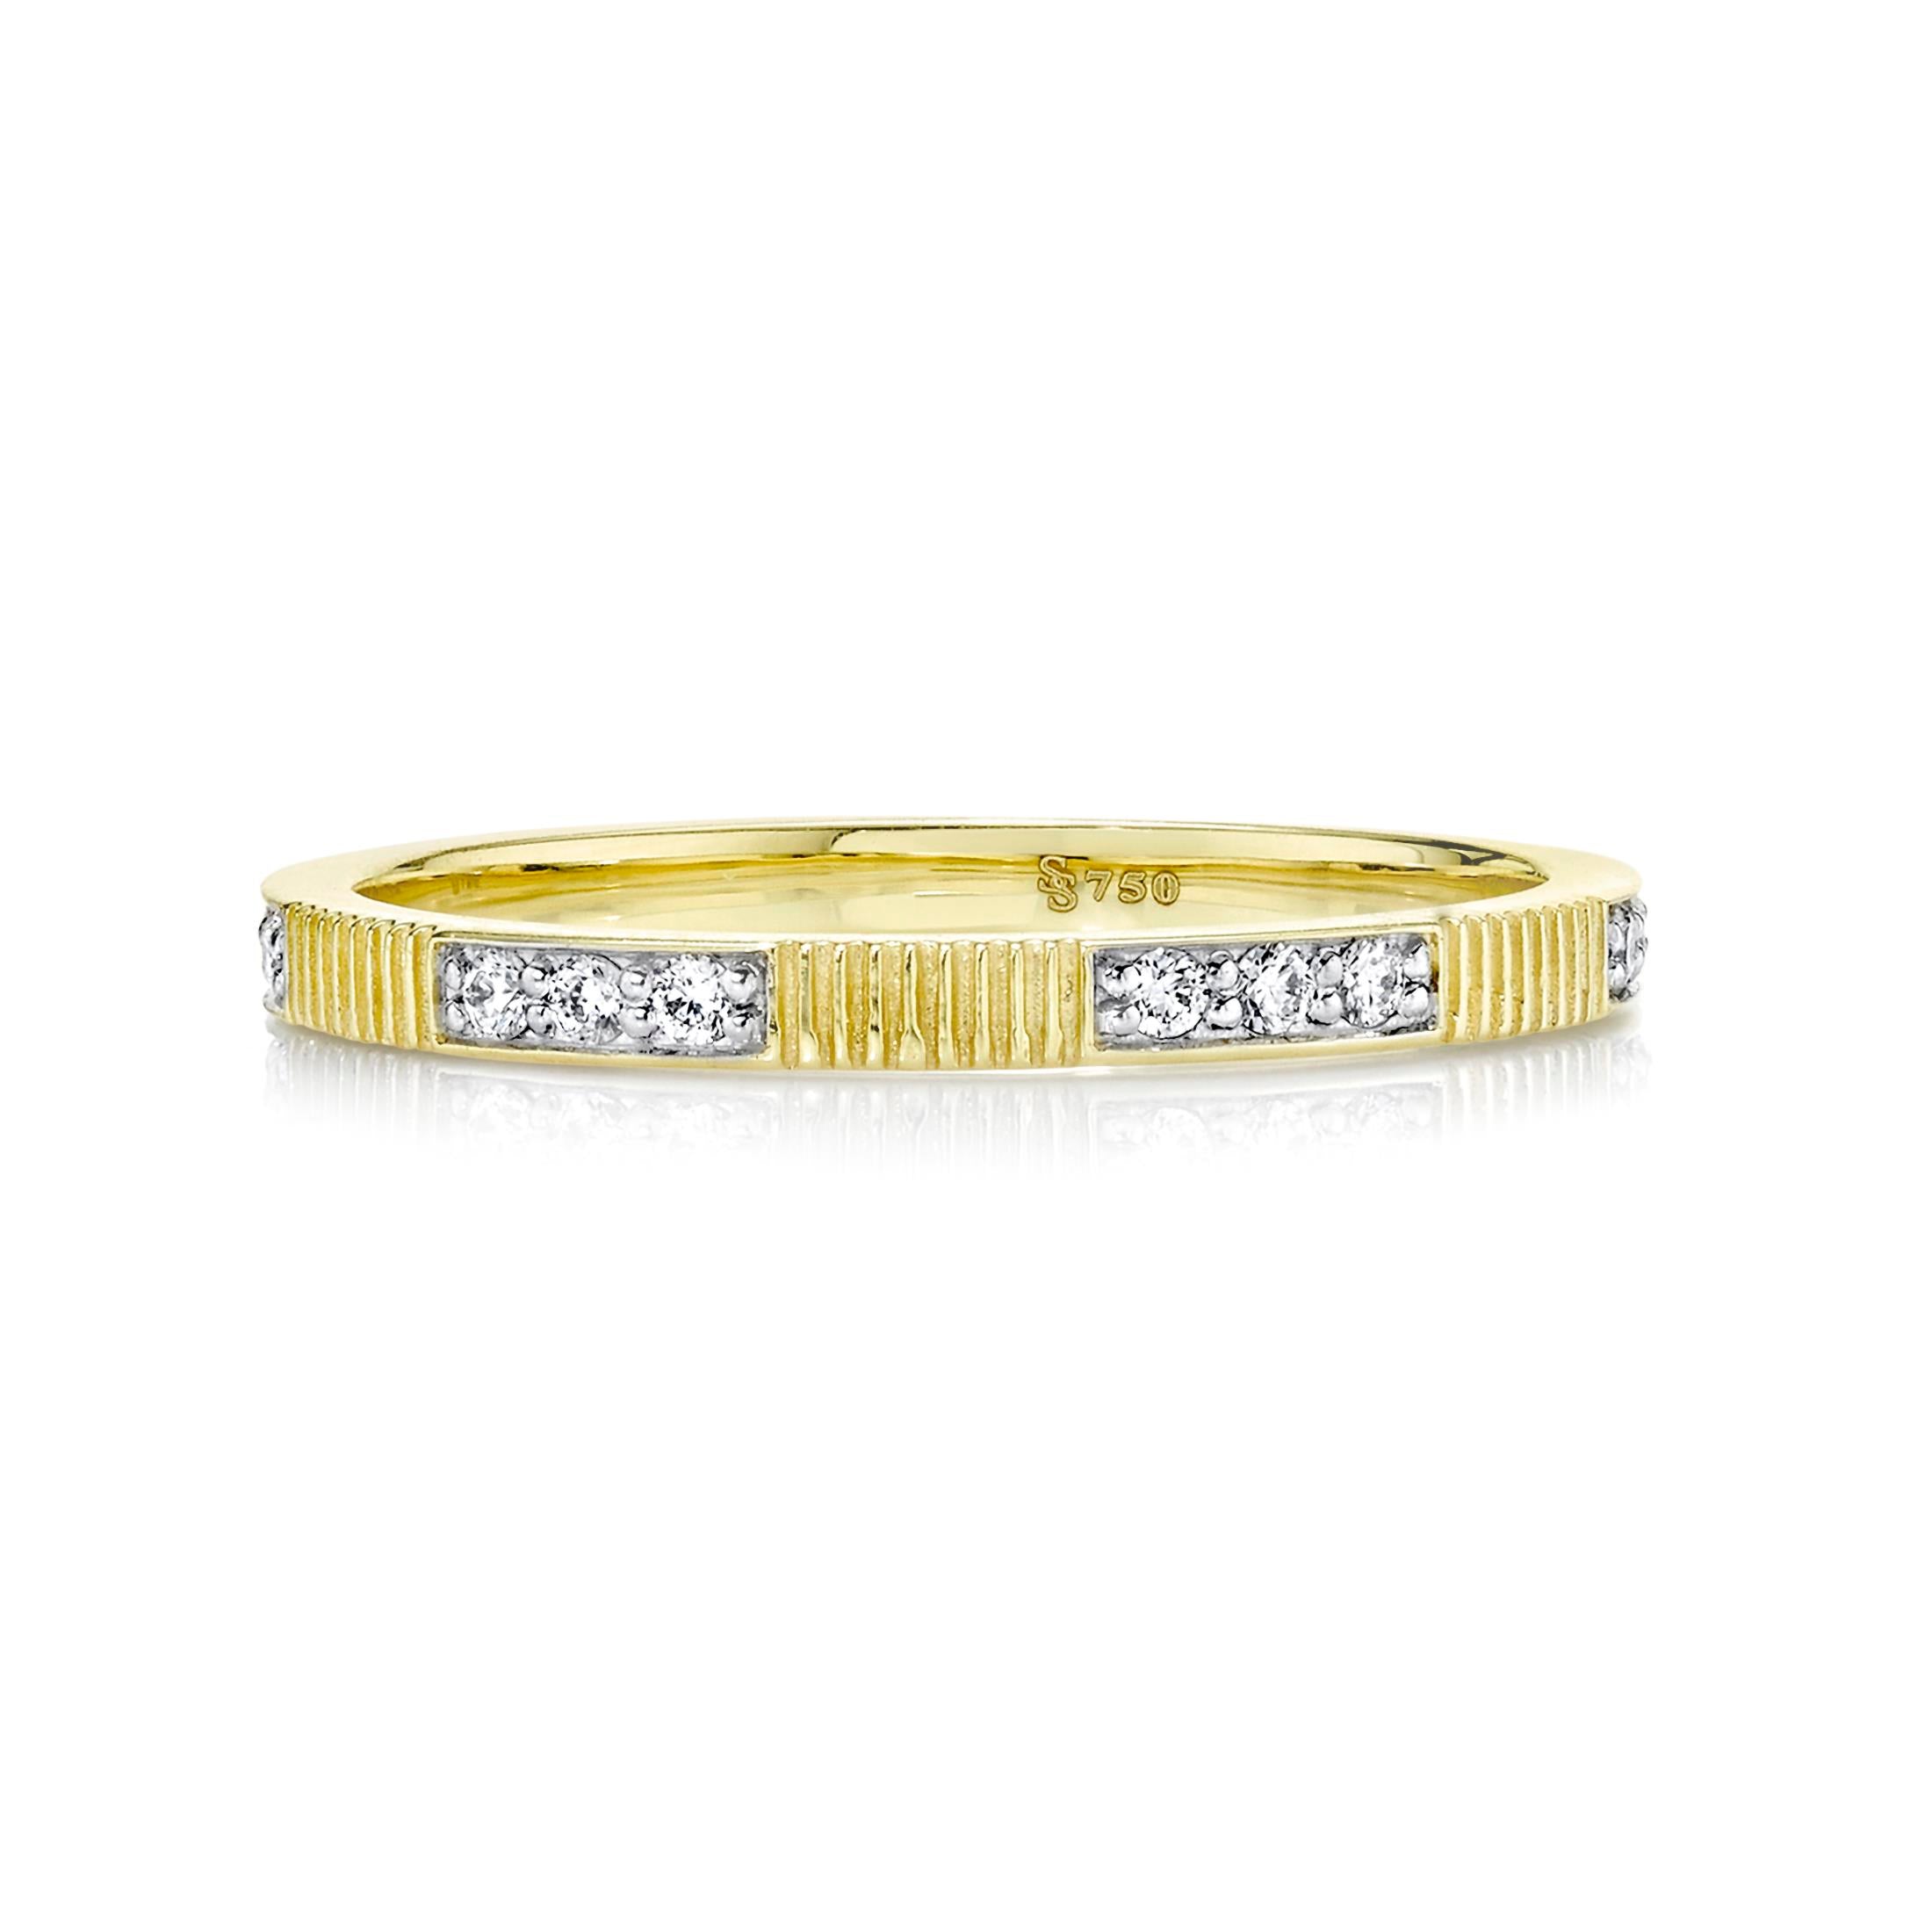 Stacker Ring with White Diamond and Strie Detail